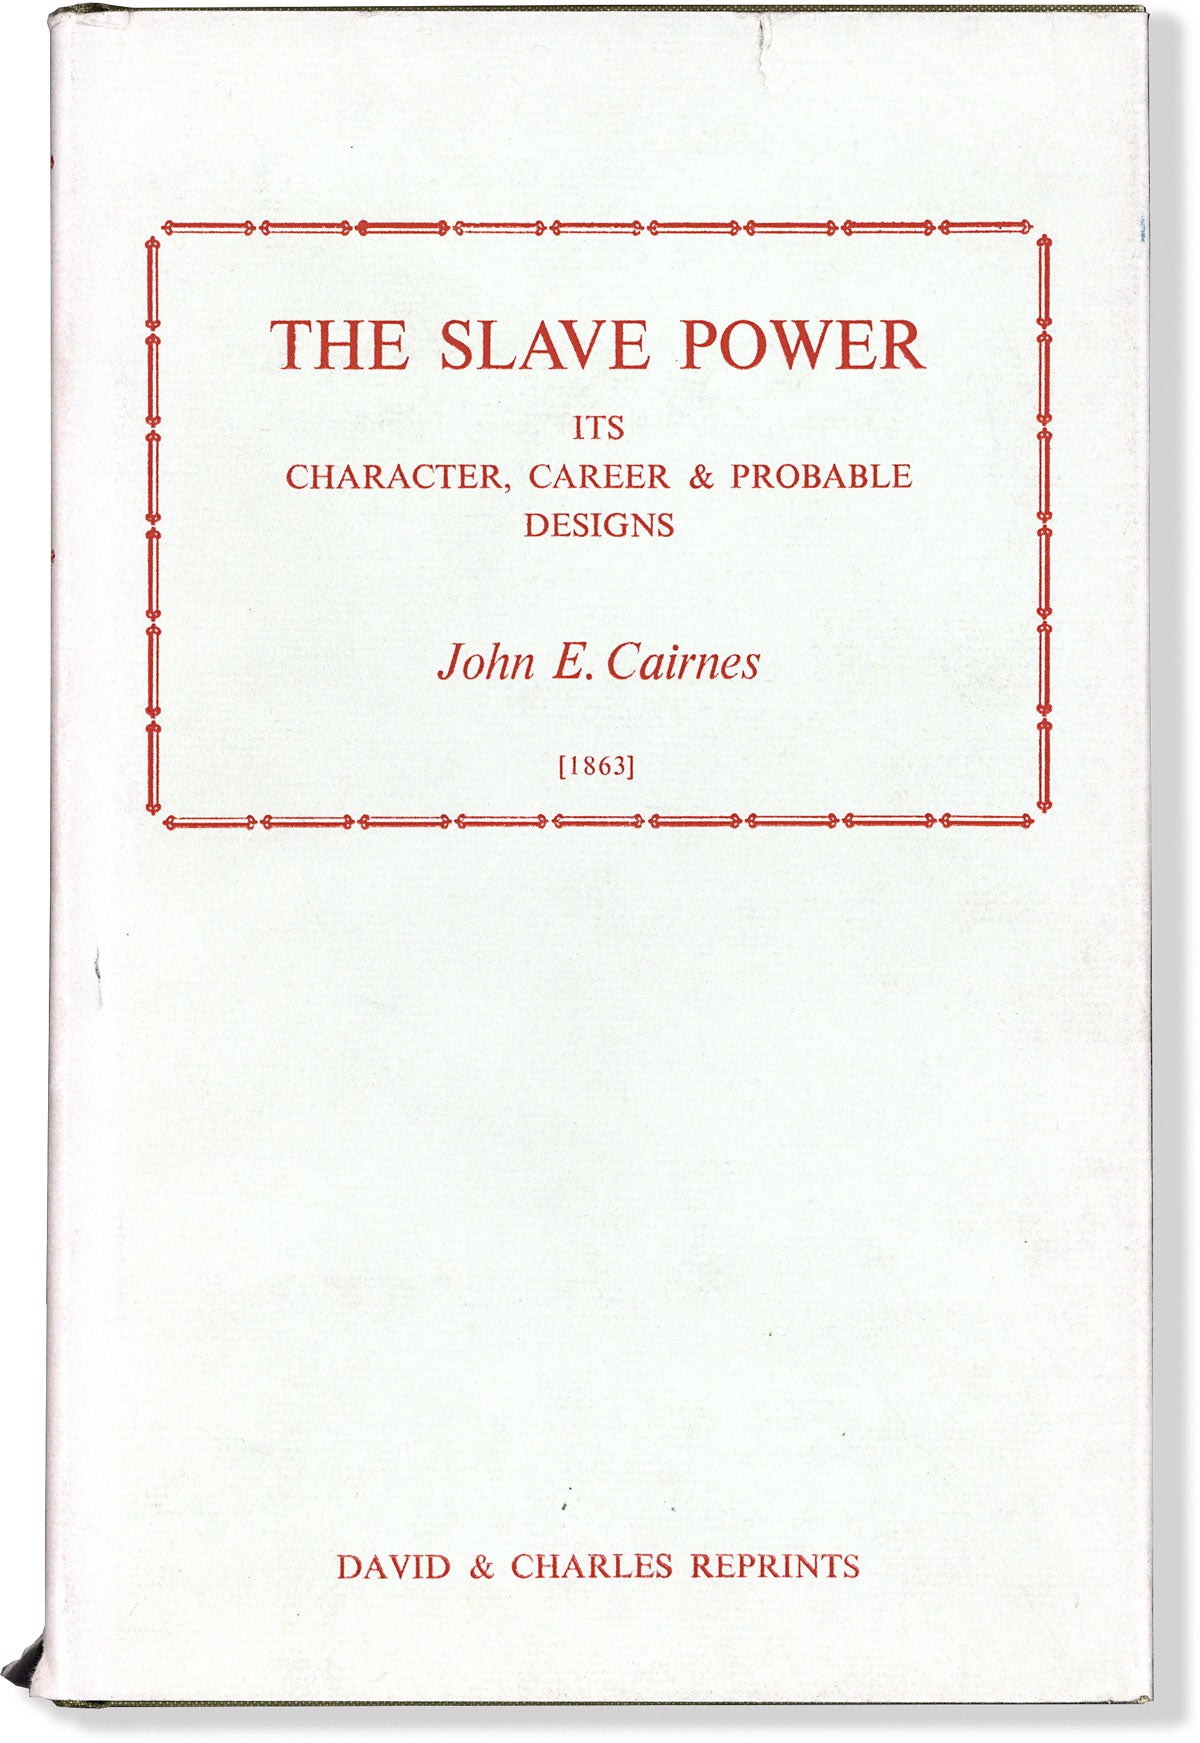 [Item #15244] The Slave Power, Its Character, Career & Probable Designs. AFRICAN AMERICANS, John E. CAIRNES.